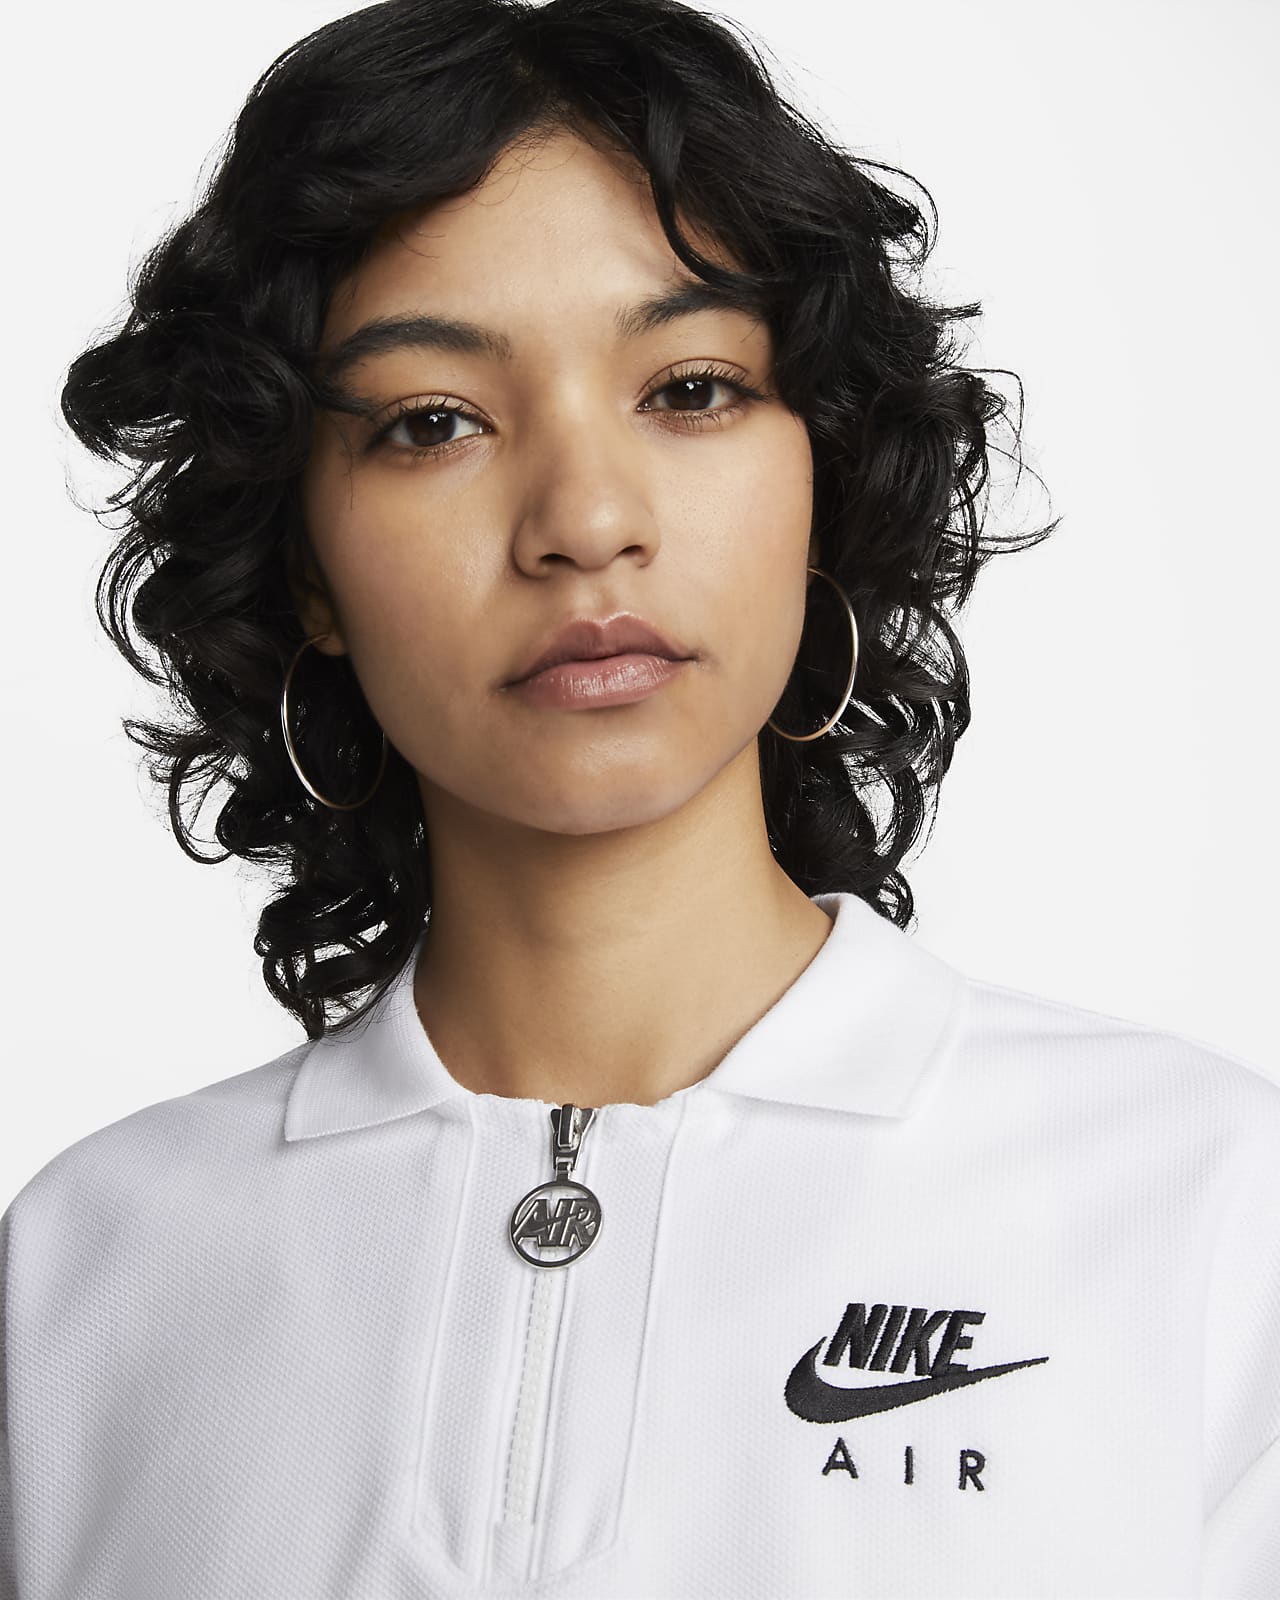 syndroom herfst Extra Nike Air Pique polo voor dames. Nike NL